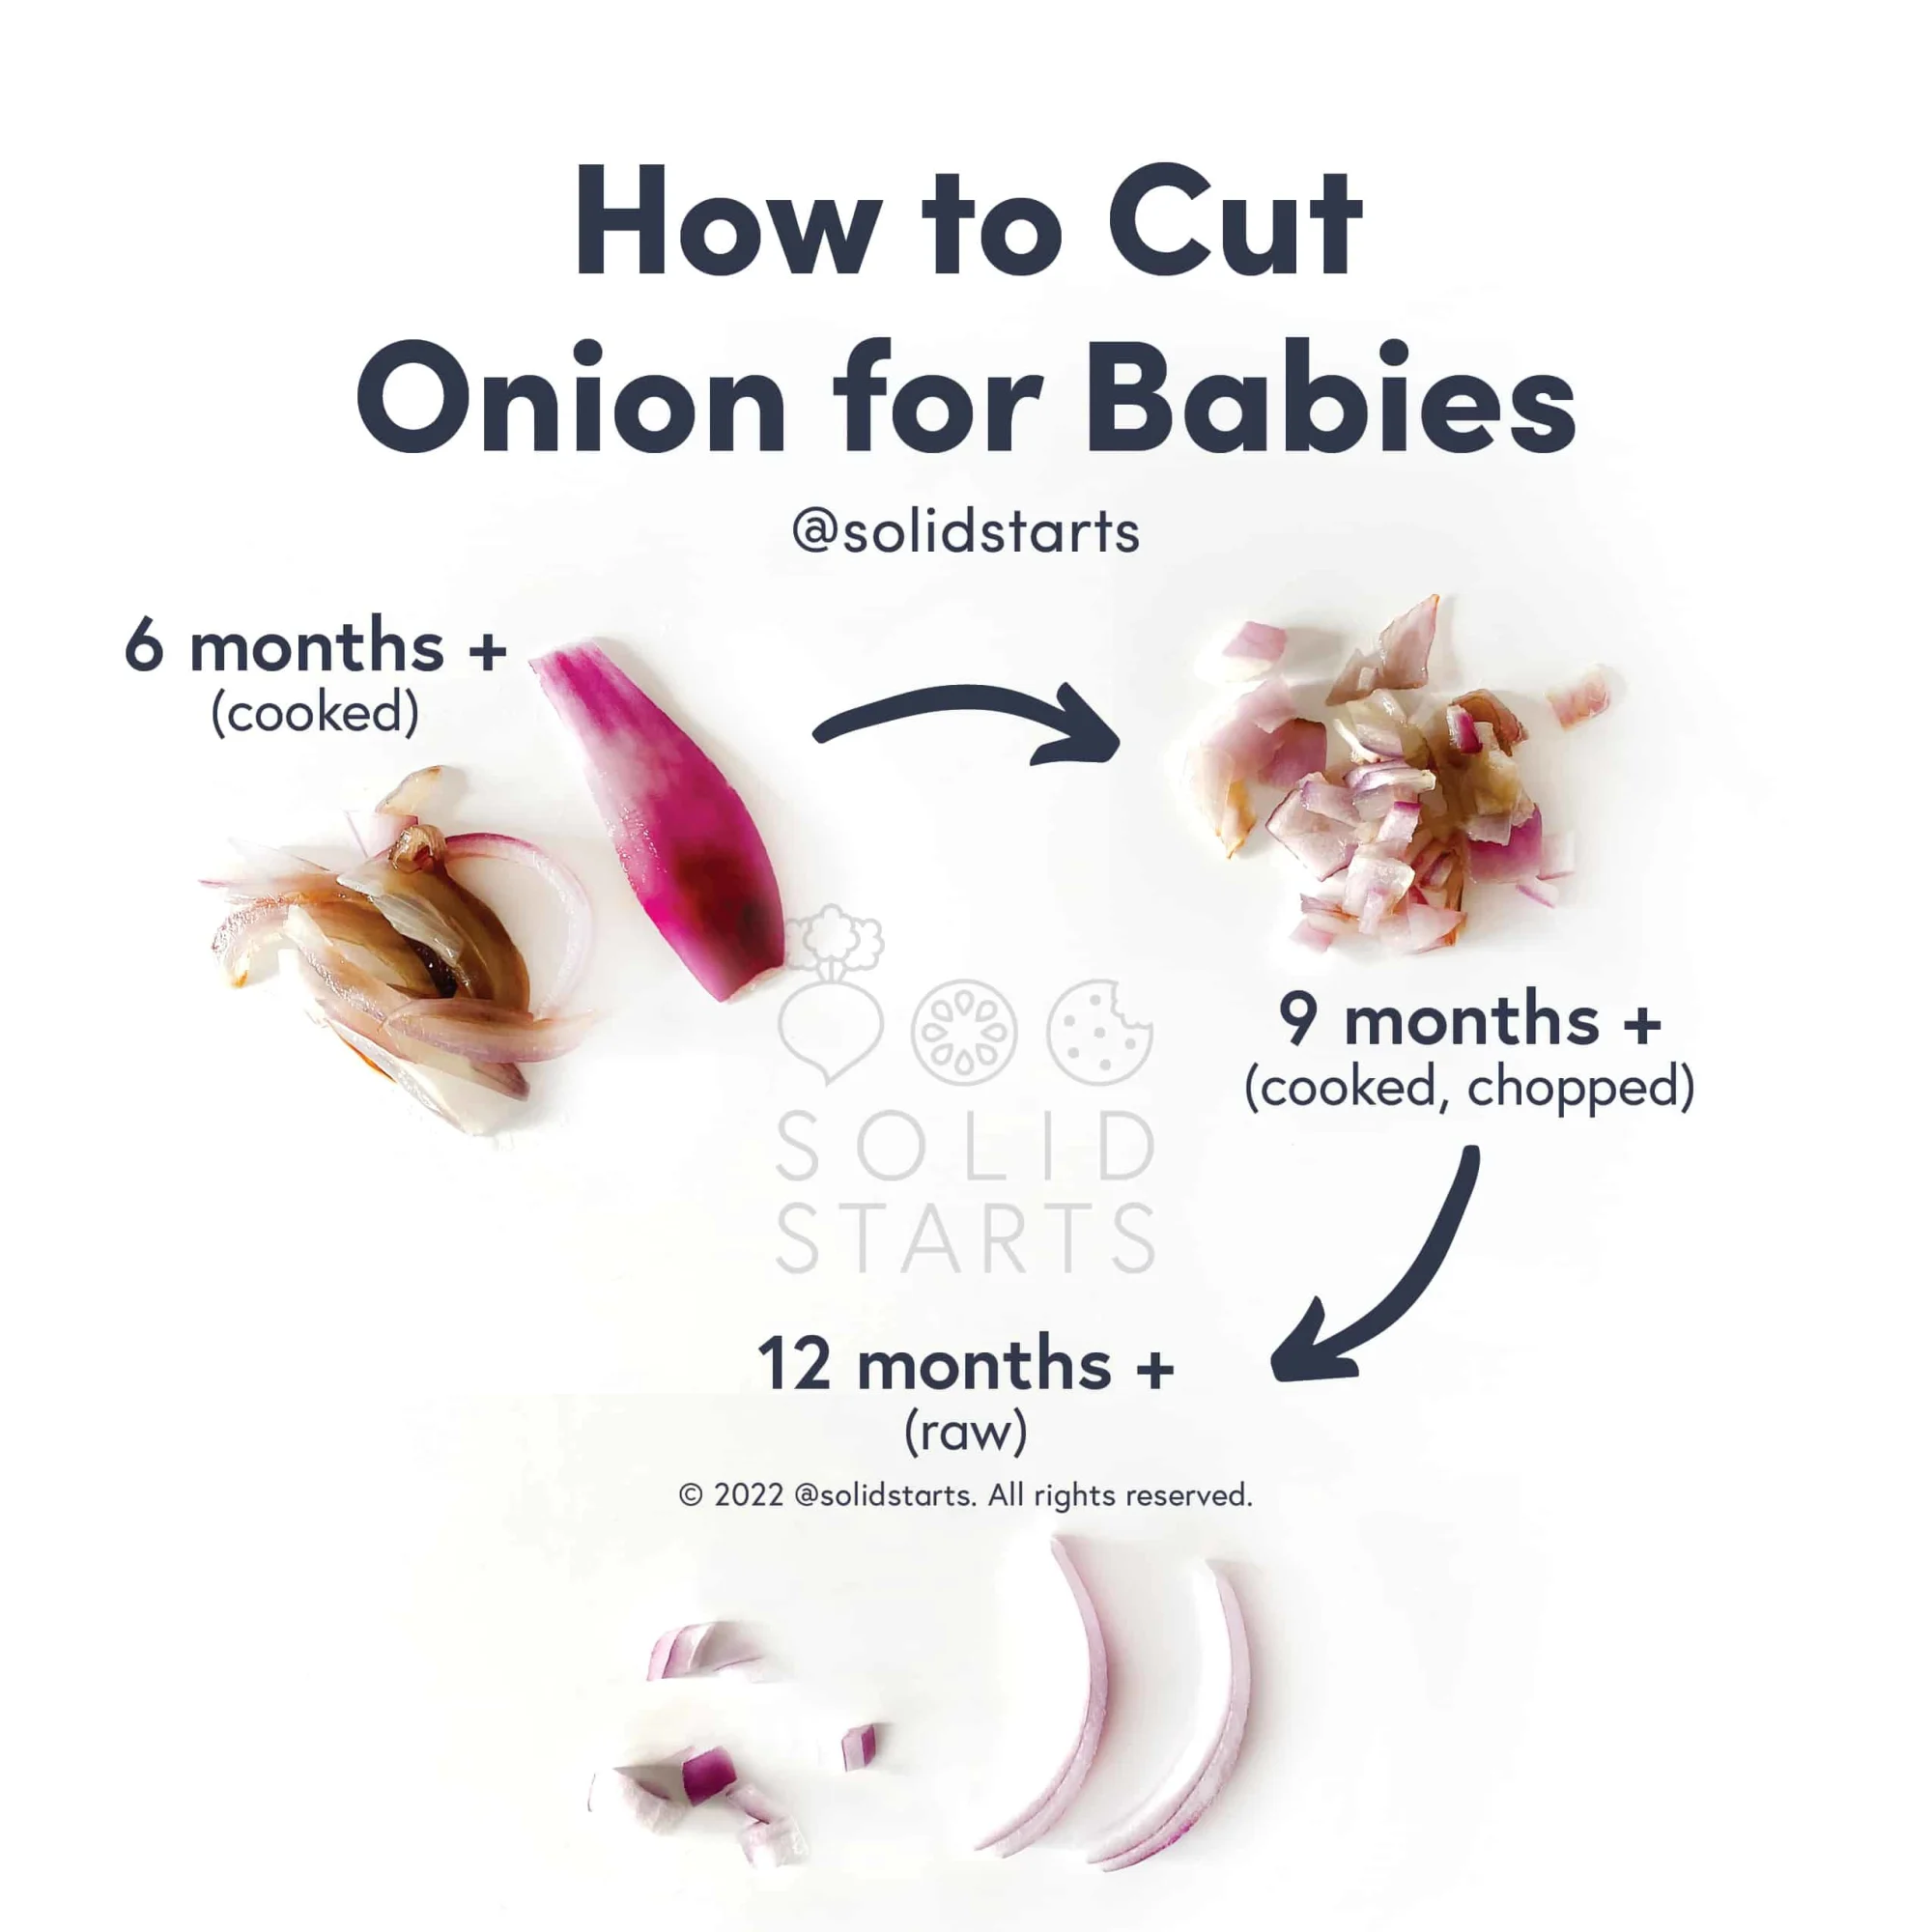 an infographic with the header "how to cut onion for babies": large cooked slices for 6 mos+, cooked chopped for 9 mos+, raw finely chopped or thinly sliced for 12 mos+